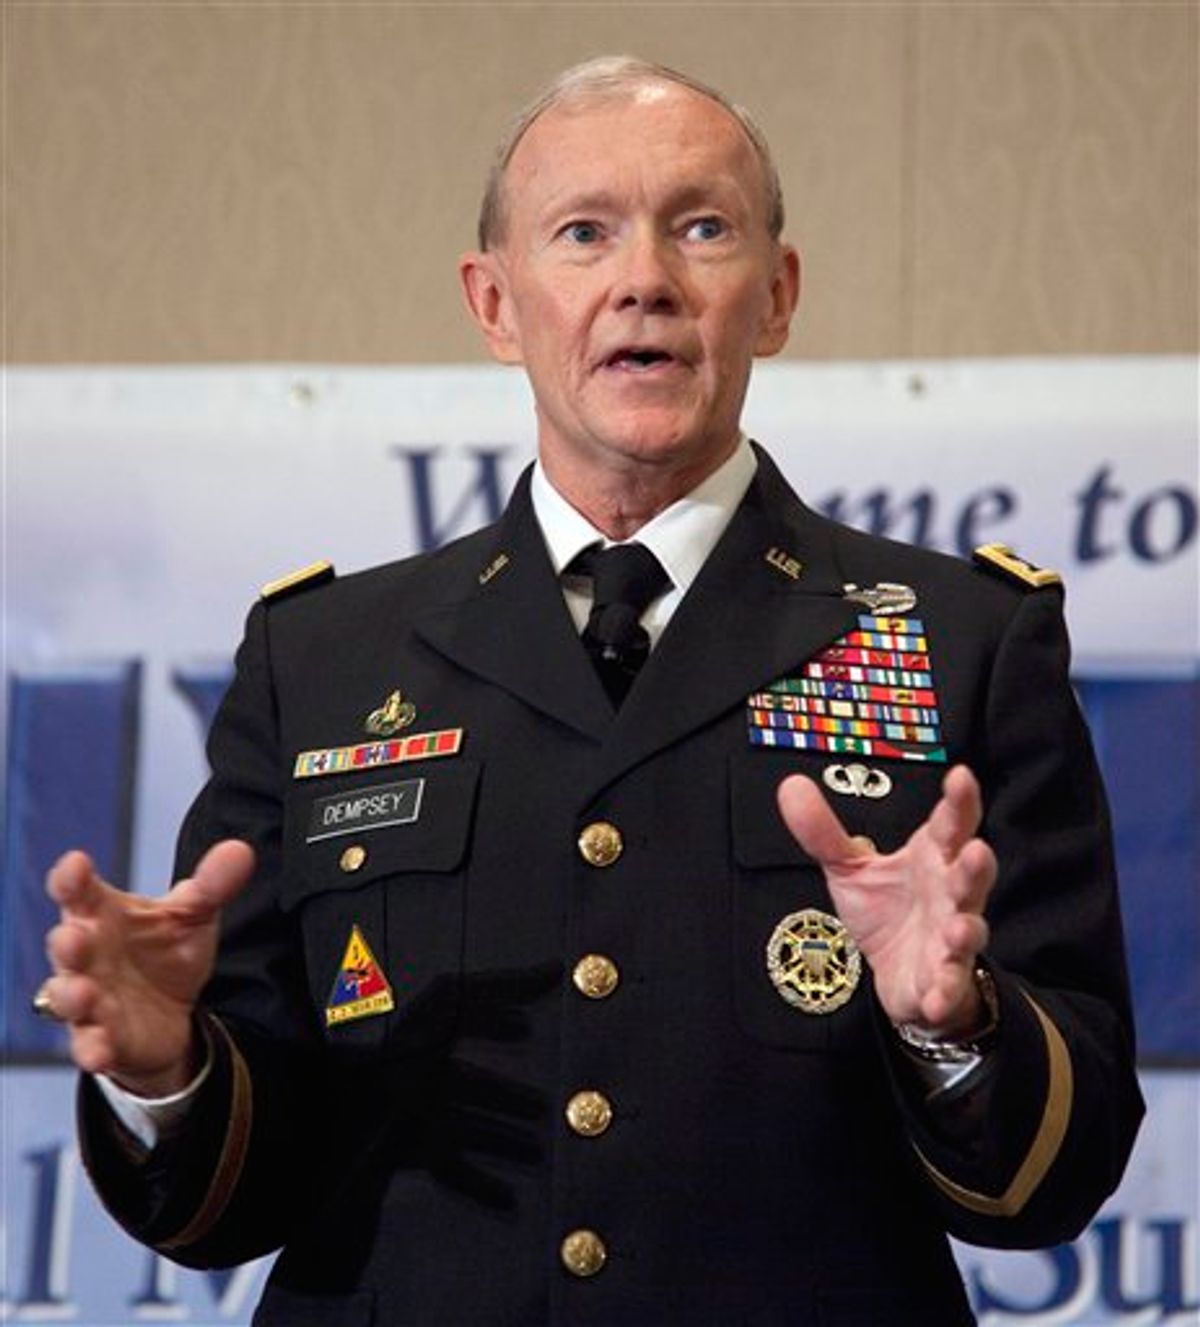 Army Chief of Staff Gen. Martin Dempsey speaks to family members of fallen service members at a Tragedy Assistance Program for Survivors seminar, Friday, May 27, 2011, in Arlington, Va.  (AP Photo/Evan Vucci) (AP)